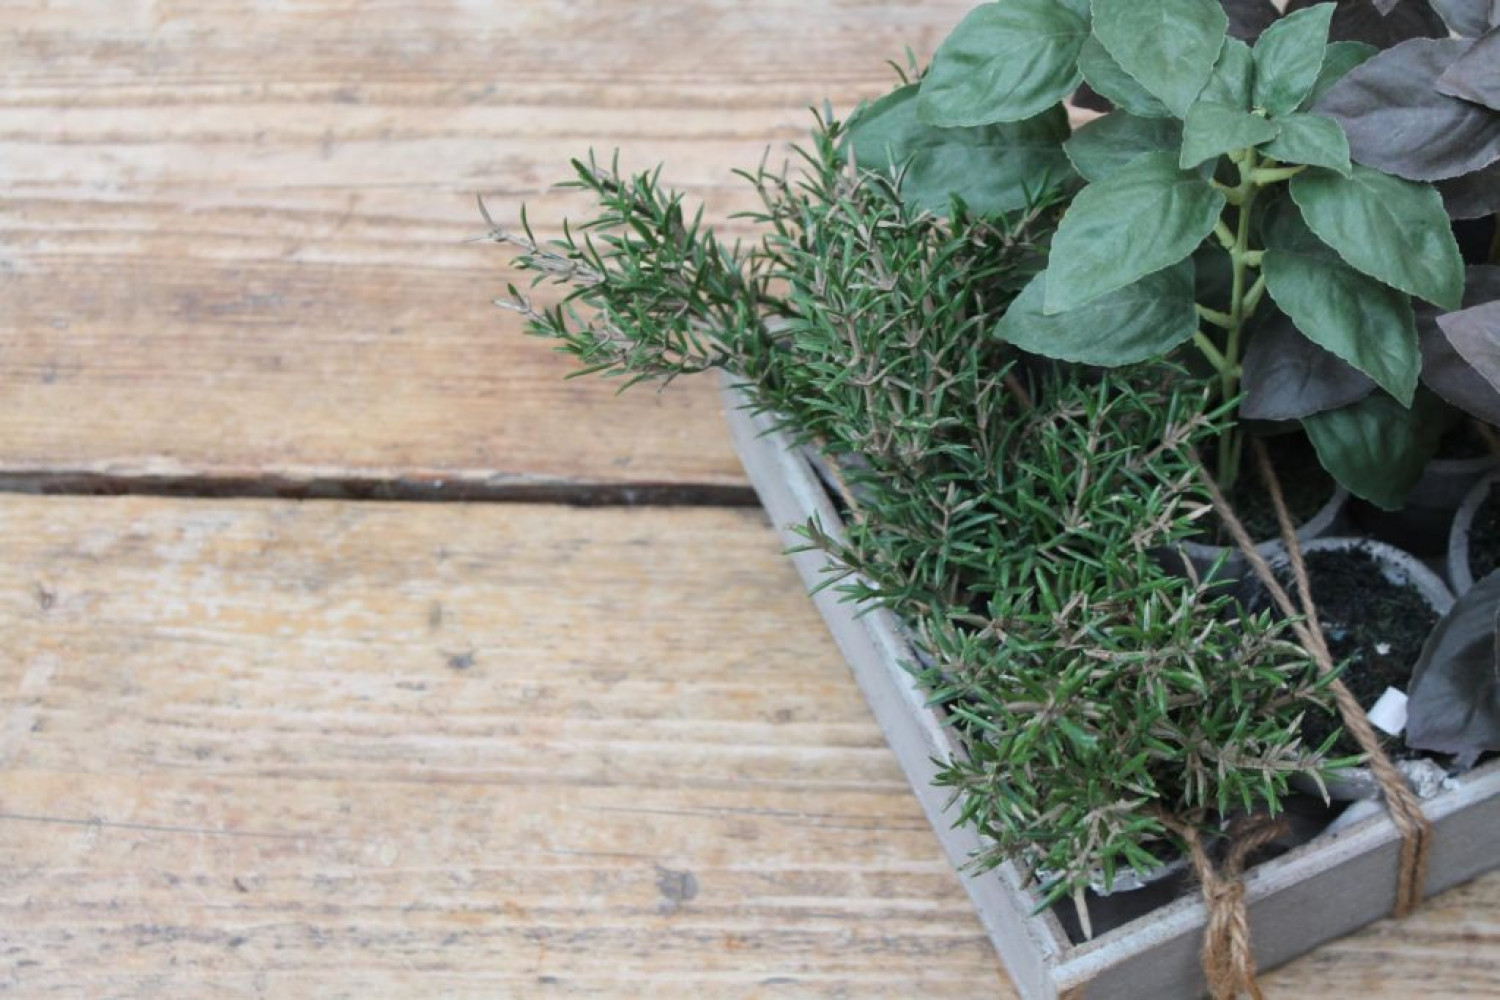 Potted herbs and green plants, including rosemary - Create A Herb Garden tutorial